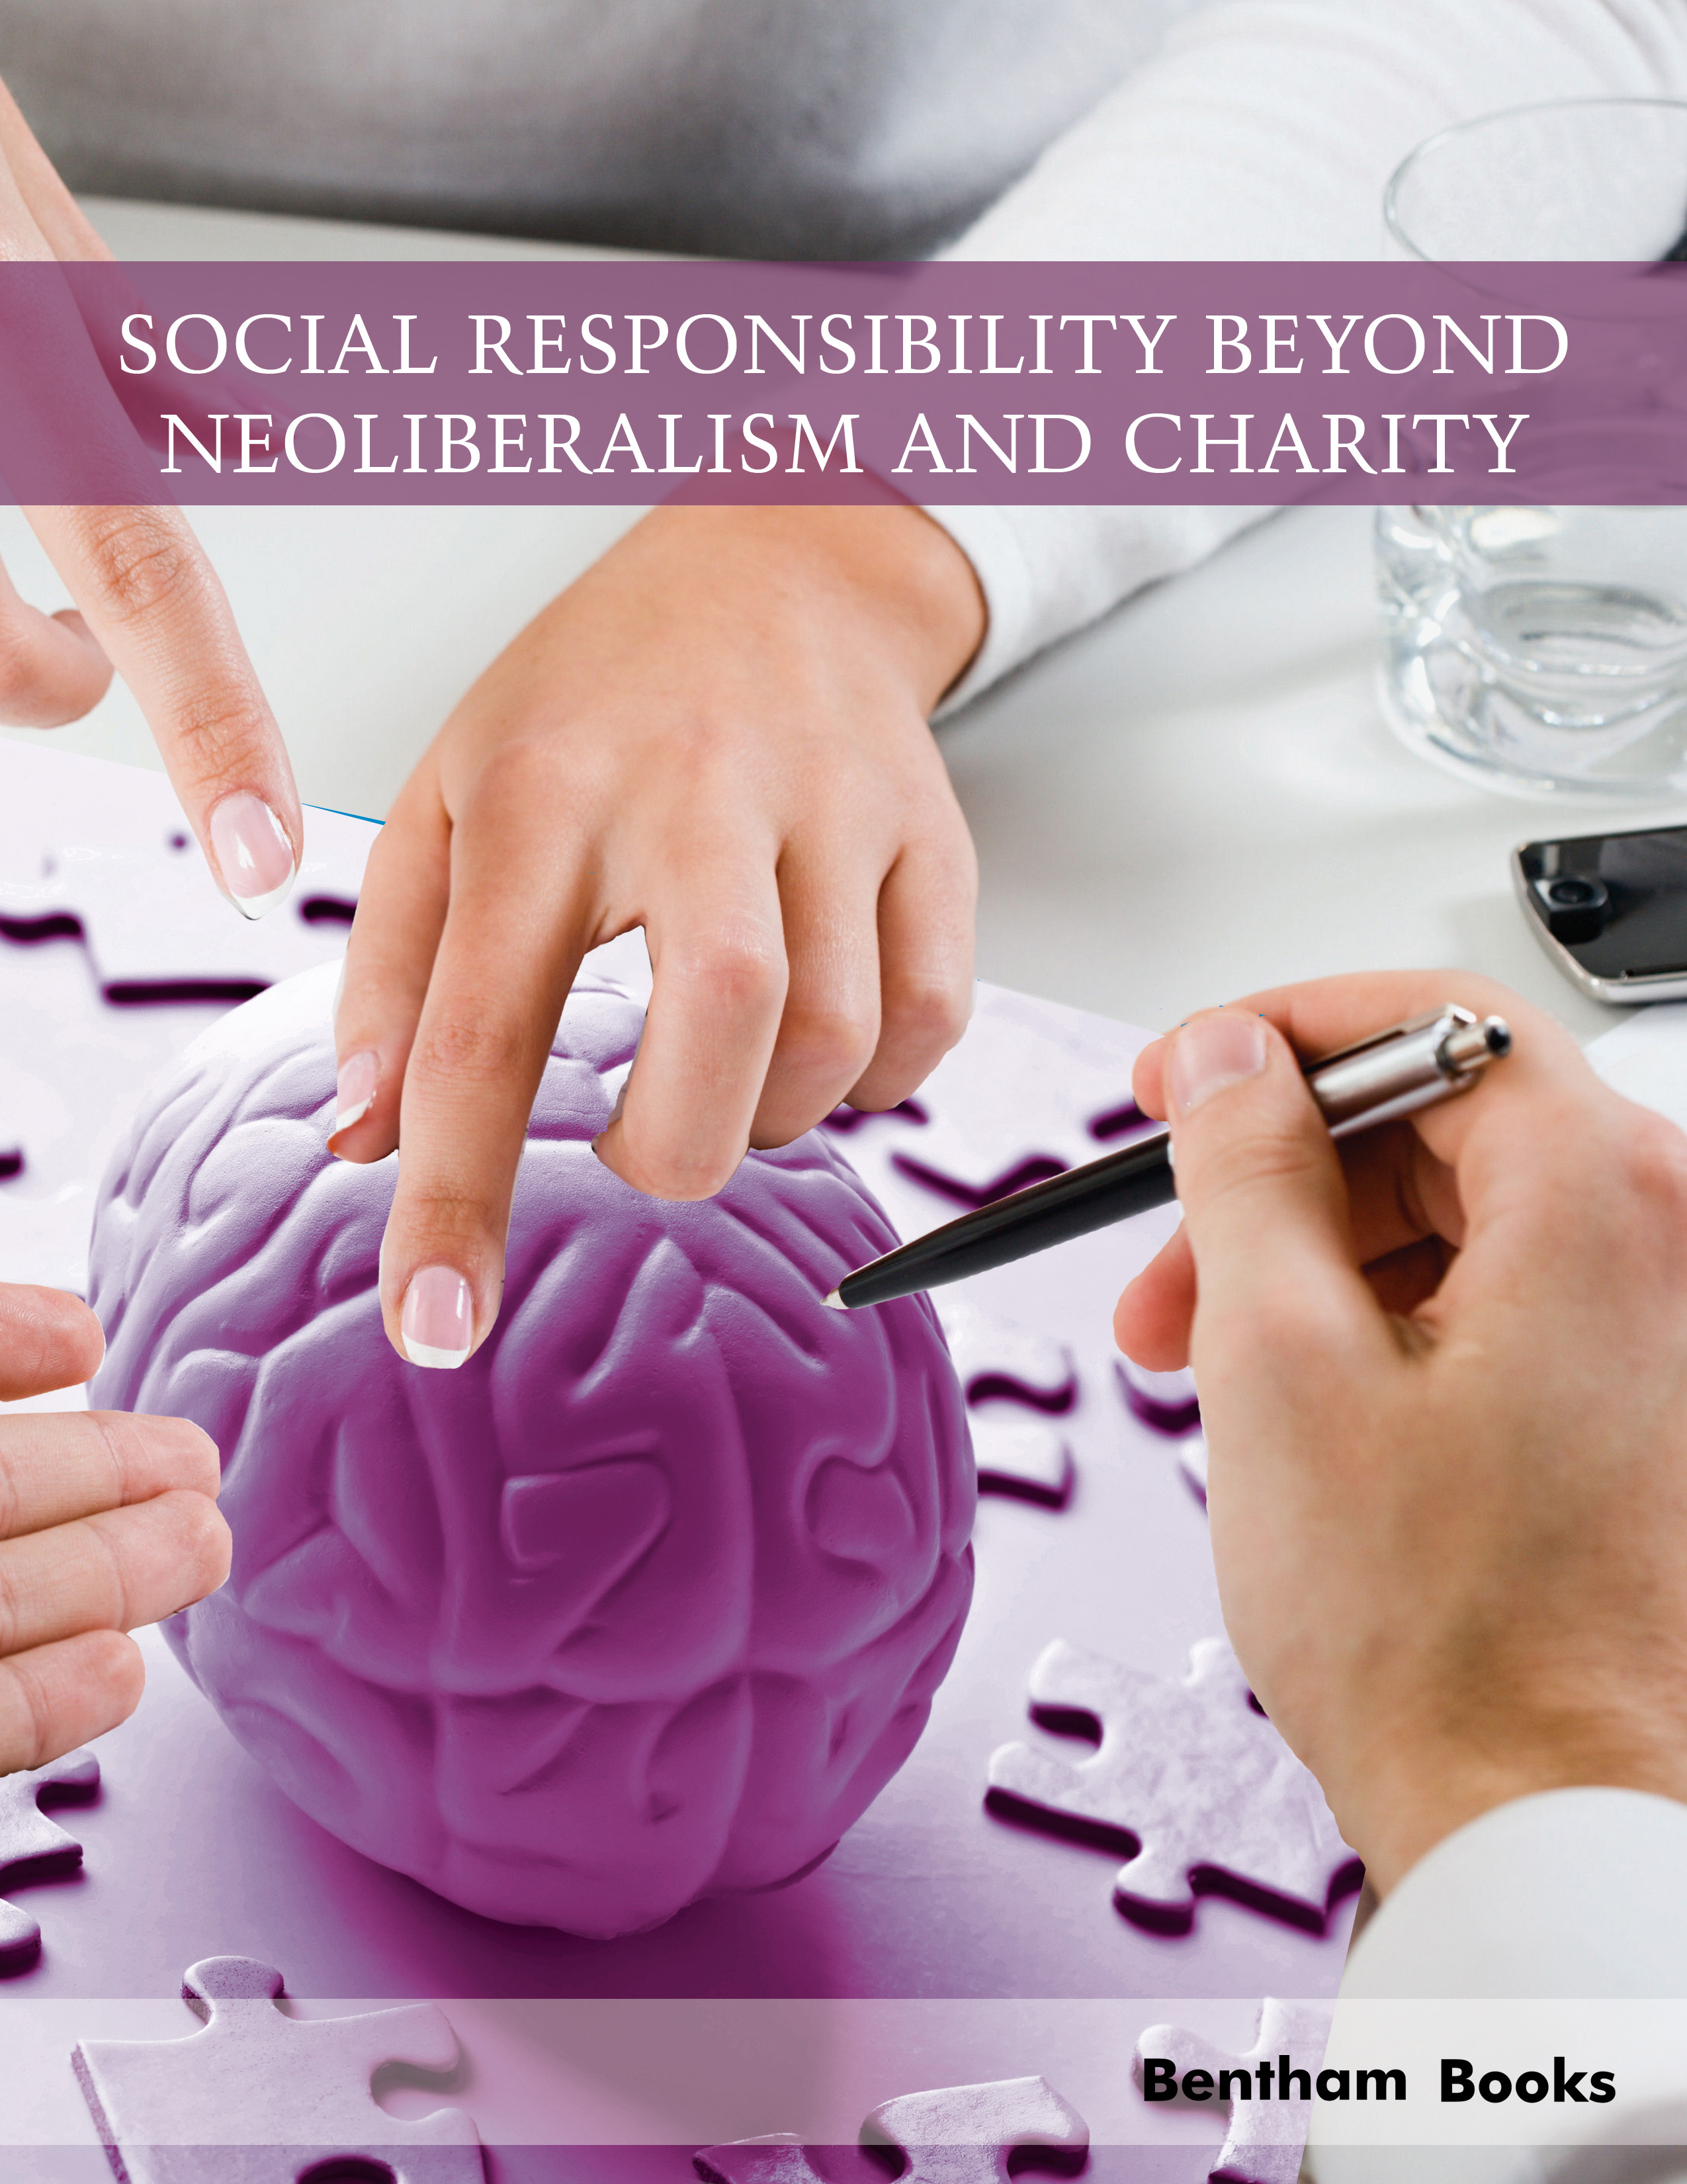 Social Responsibility Beyond Neoliberalism and Charity